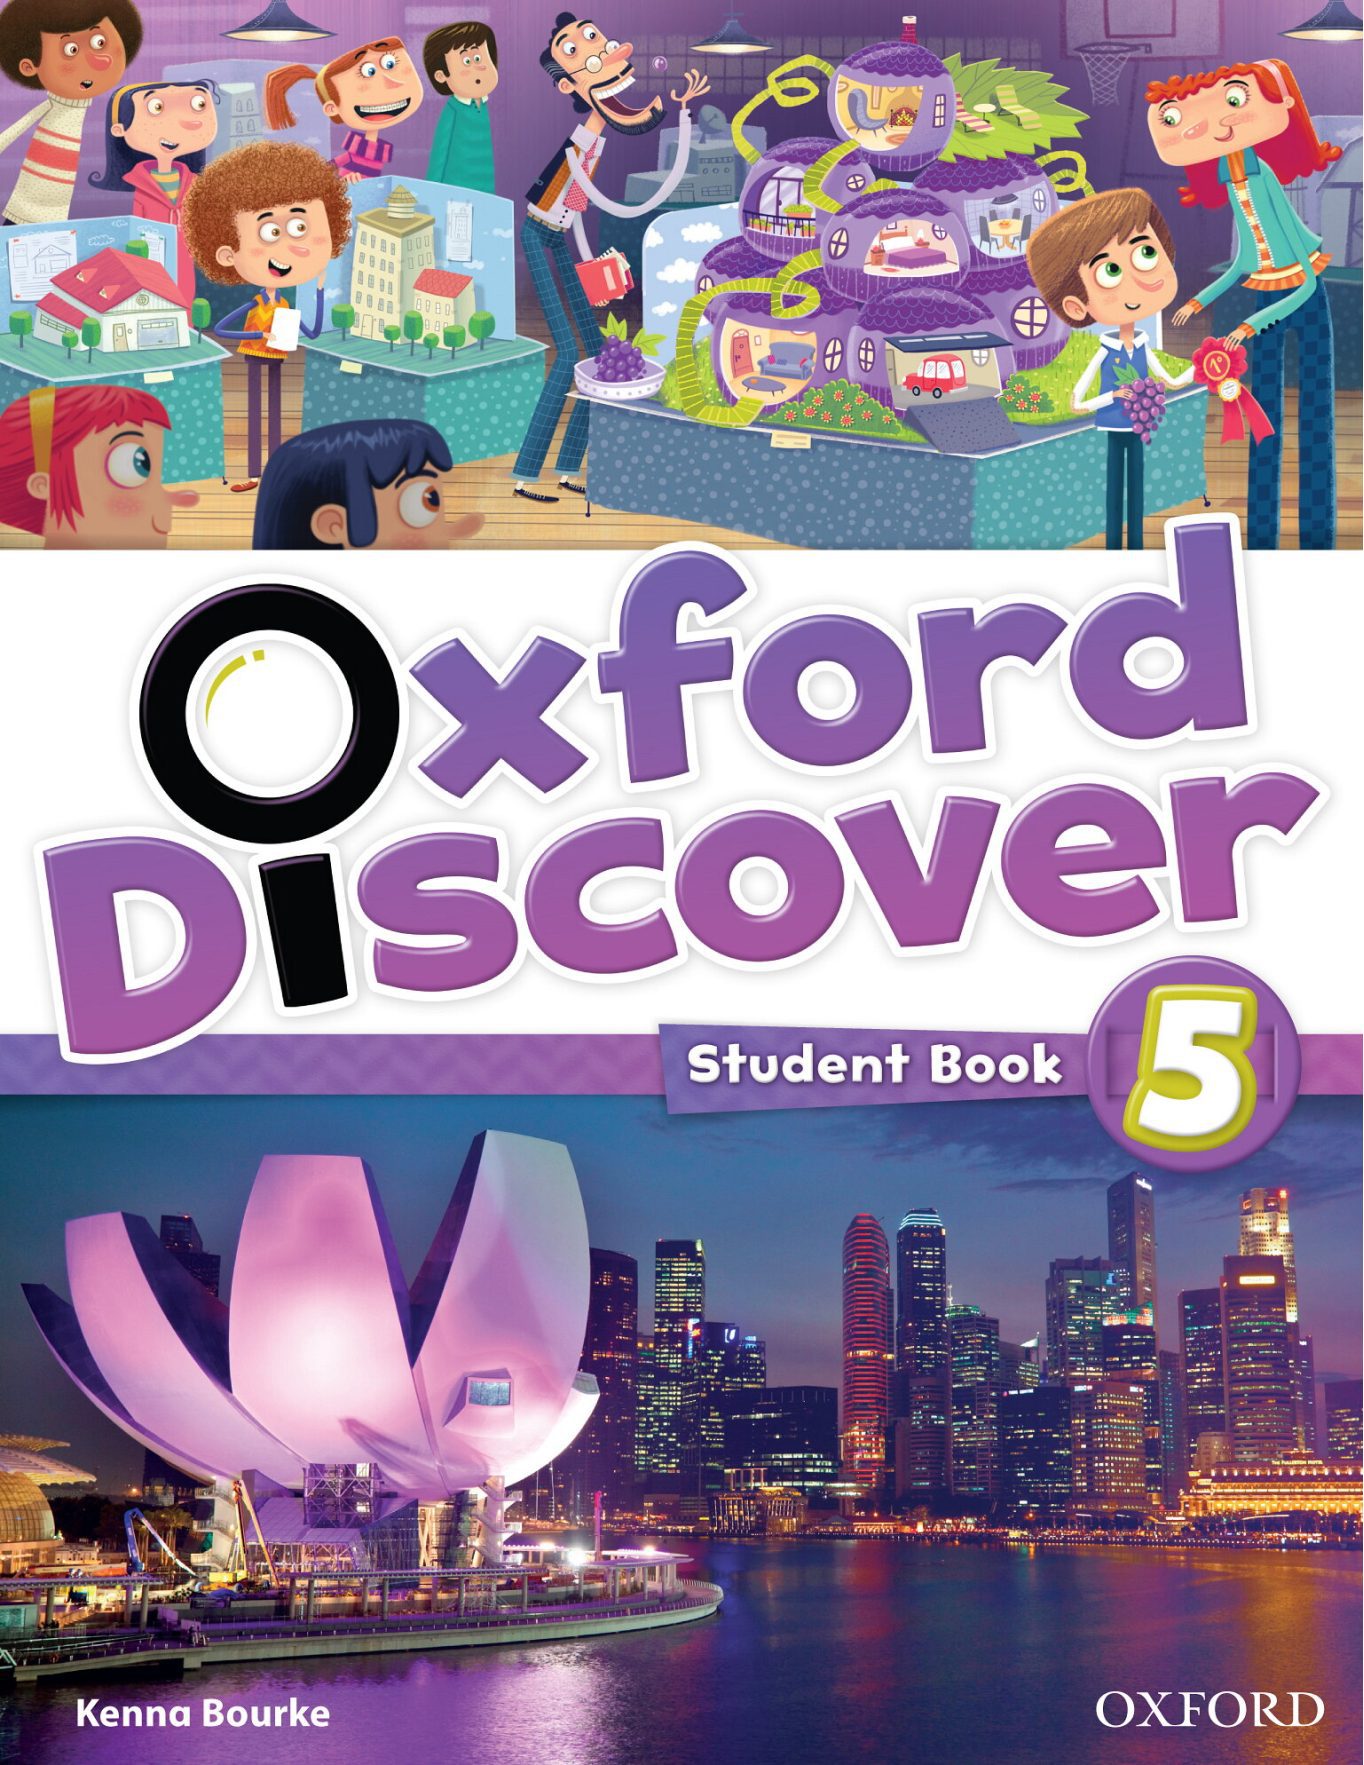 Rich Results on Google's SERP when searching for 'Oxford Discover Student's Book 5'